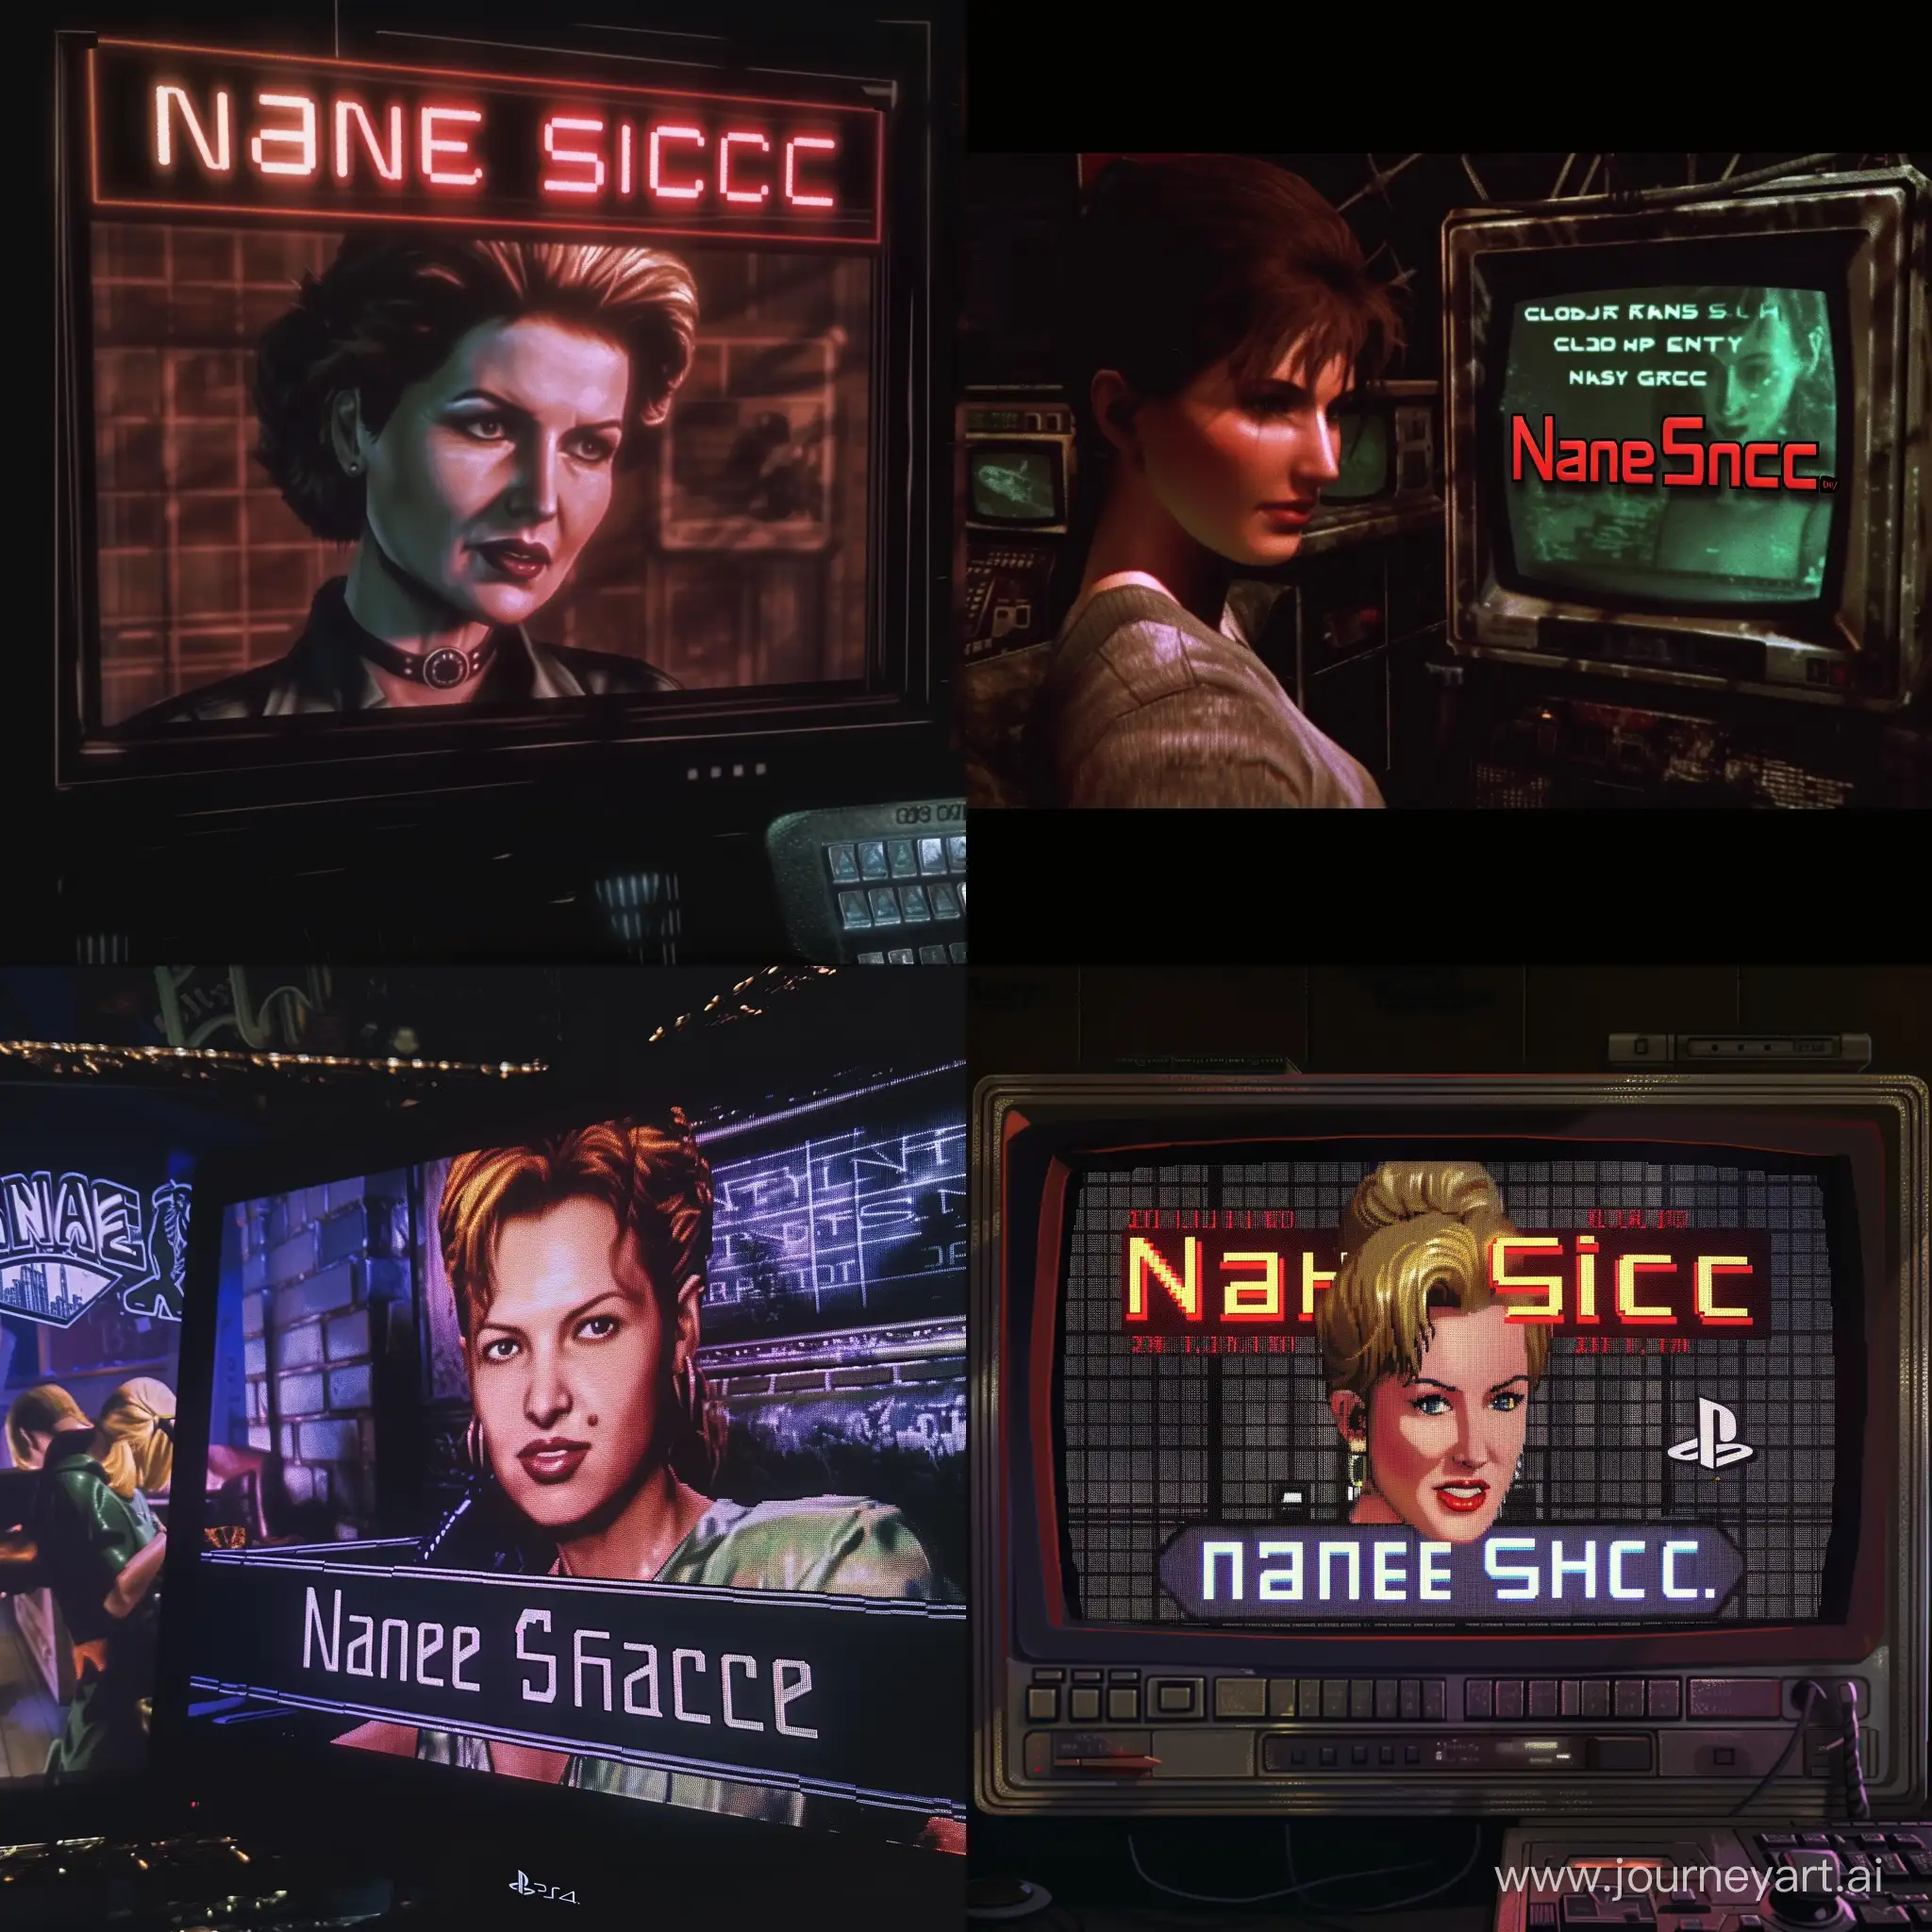 Nancy-Grace-PS2-Loading-Screen-Recreation-with-Version-6-Aspect-Ratio-11